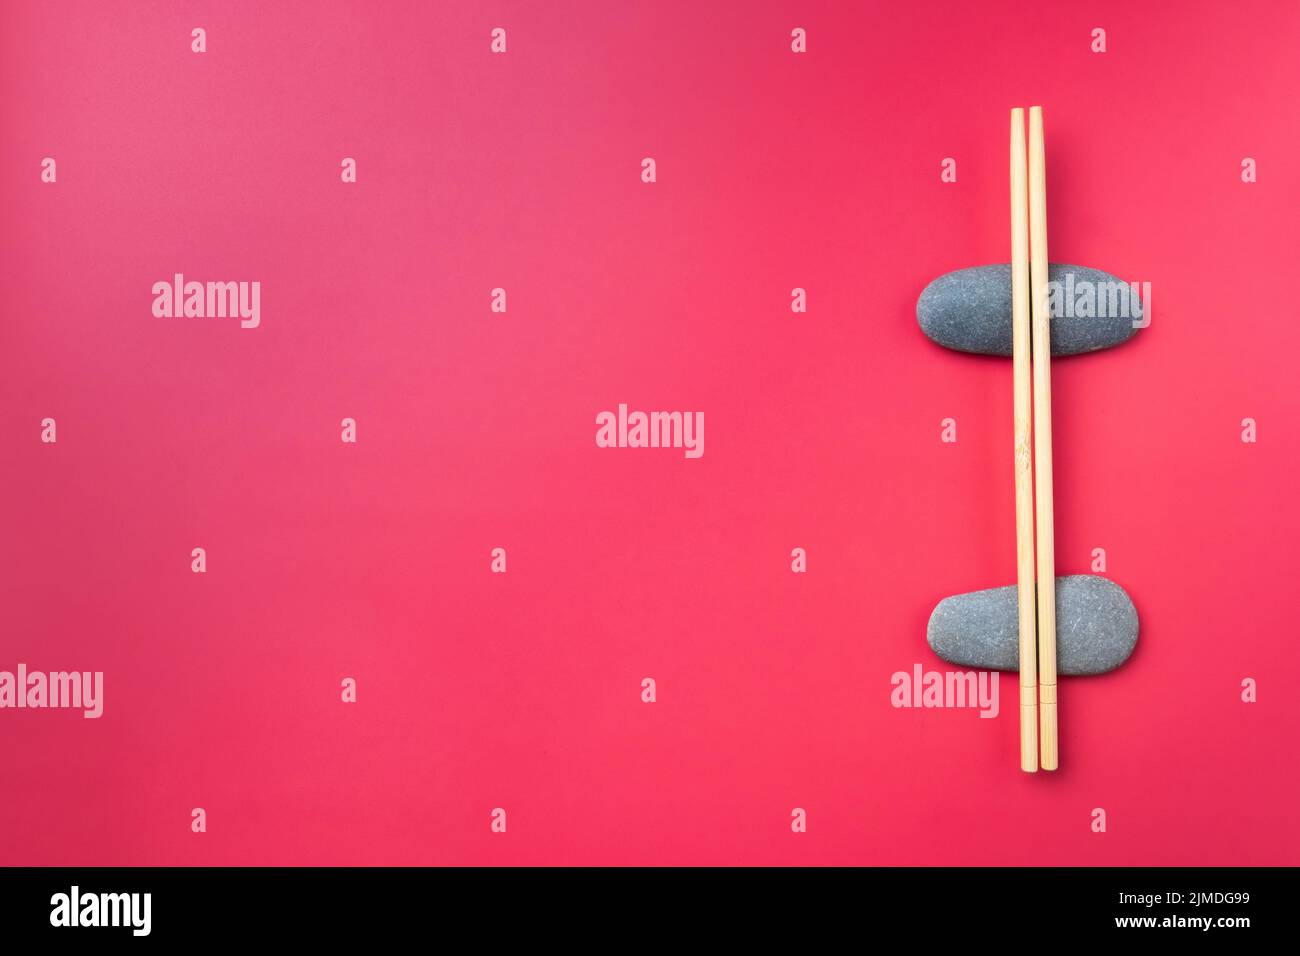 Flat lay. Light wooden chopsticks lie on oval stones on a pink background. Stock Photo